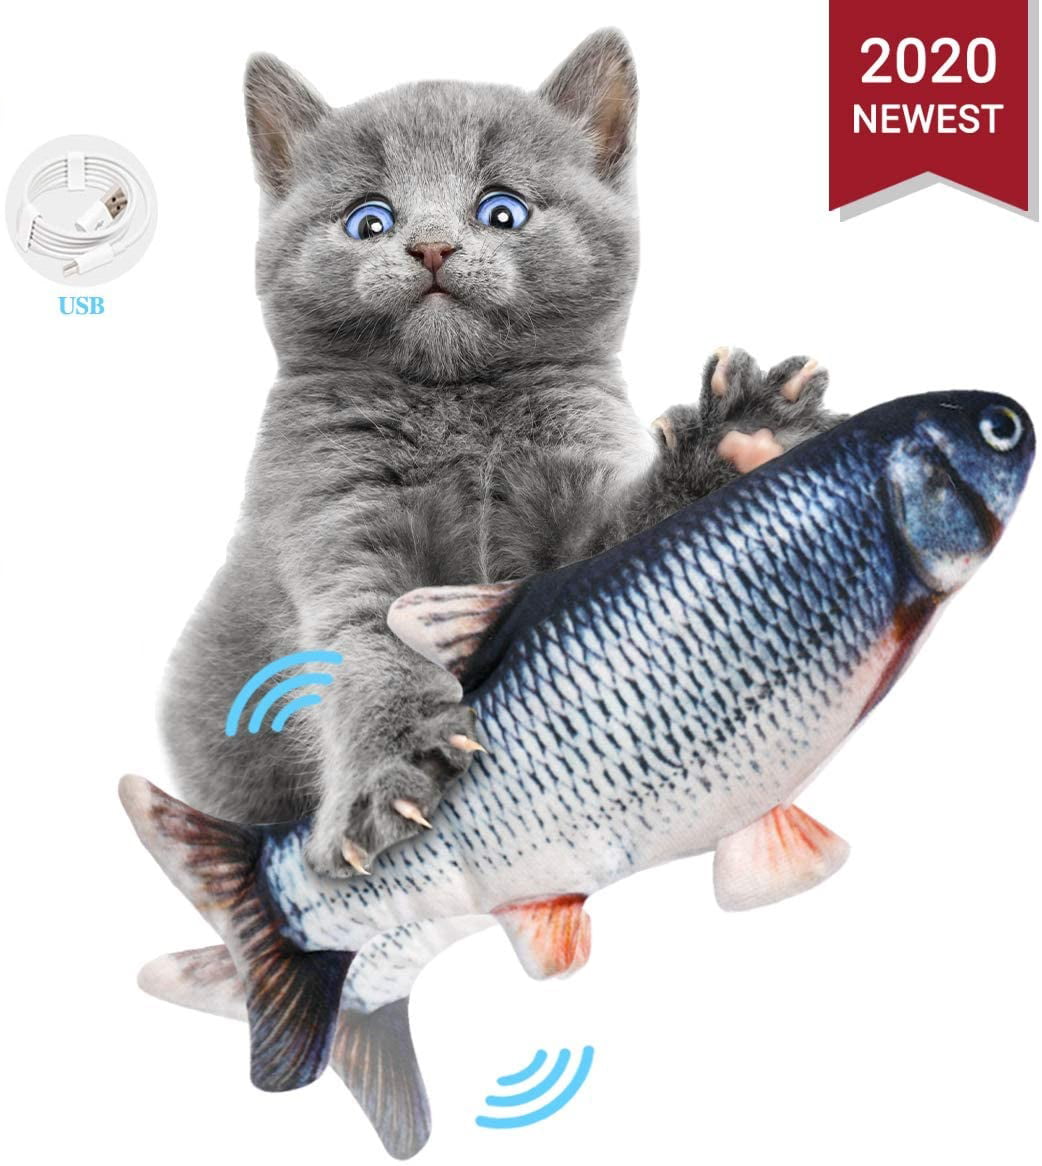 Catnip Kicker Toys Biting Chewing and Kicking Realistic Flopping Fish Fun Toy for Cat Exercise Plush Interactive Cat Toys Perfect Cat Gift for Grabbing Vovodog Electric Moving Fish Cat Toy